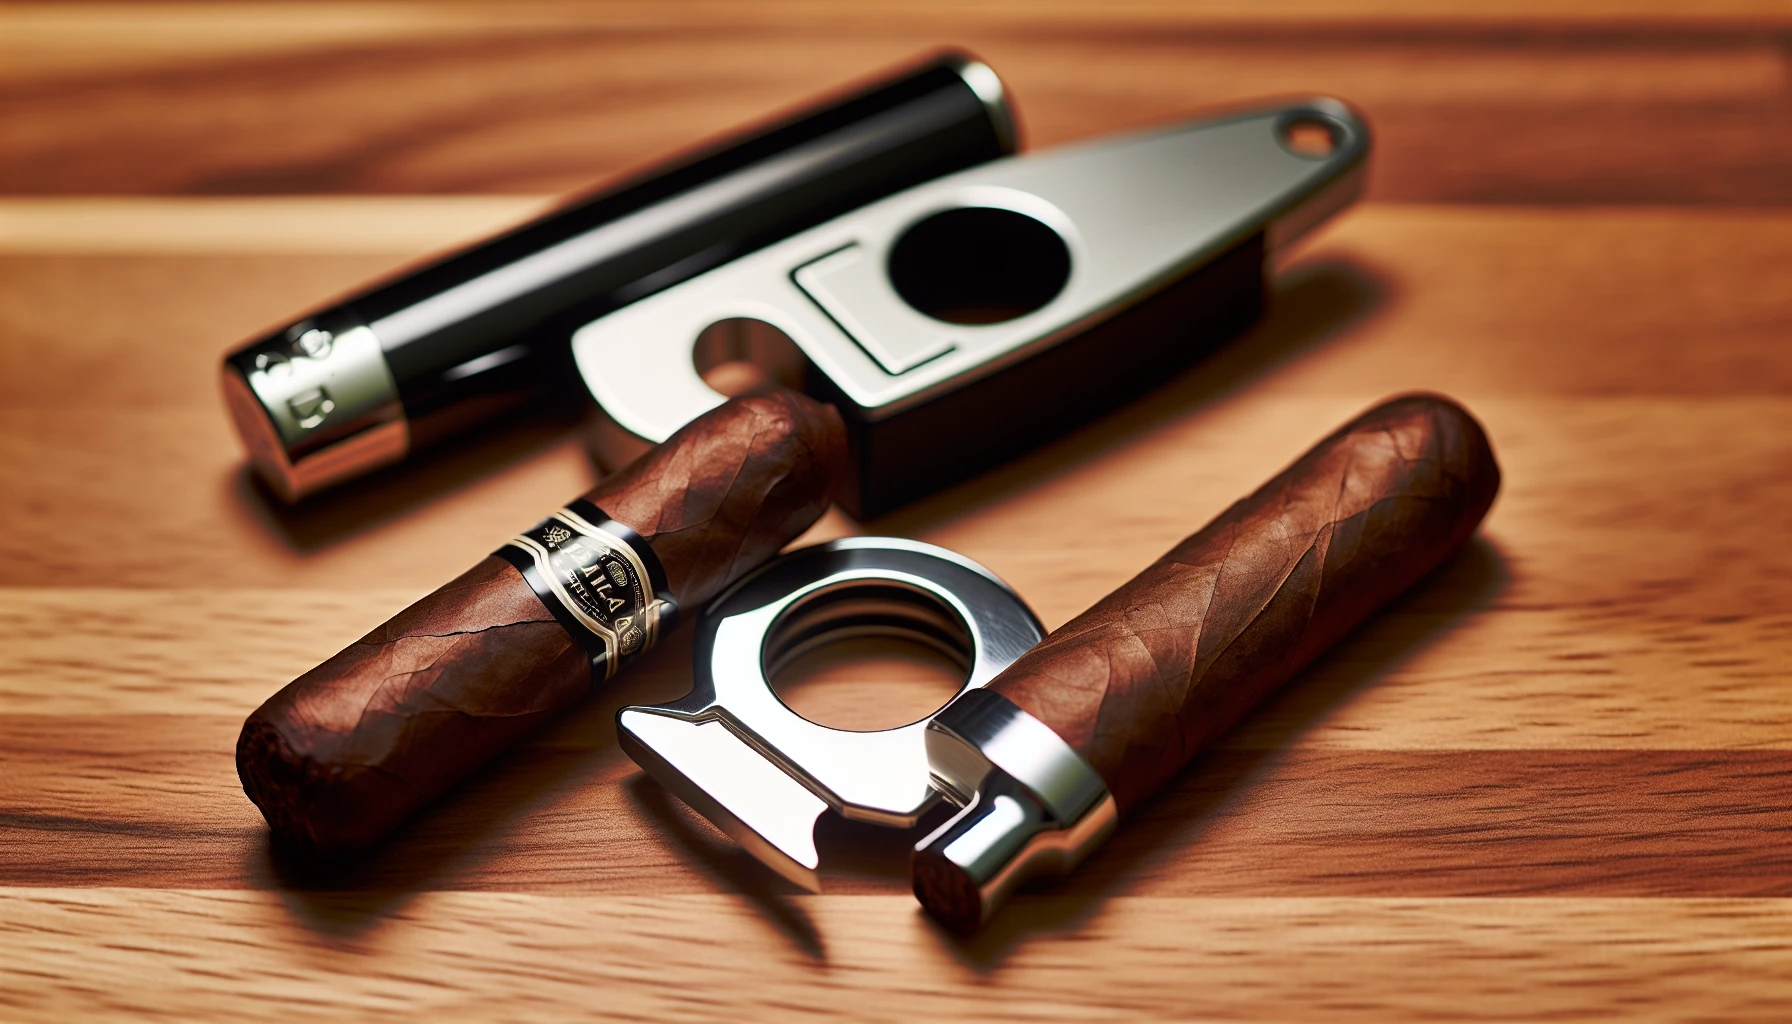 Elegant cigar accessories including a cutter and lighter